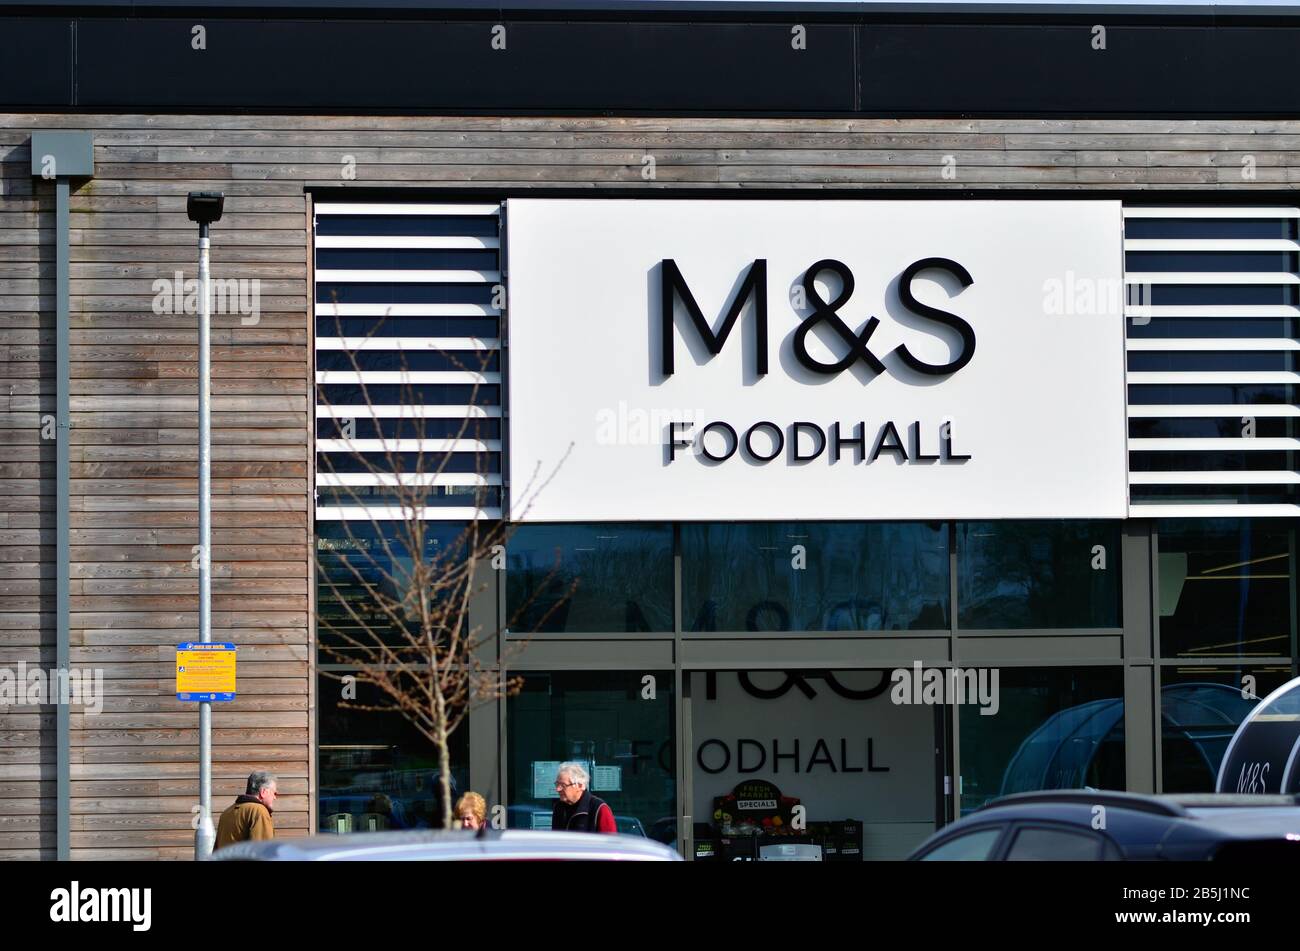 Stone / United Kingdom - March 8 2020:  M&S Foodhall sign at supermarket entrance seen in small british town Stone in Staffordshire. Stock Photo